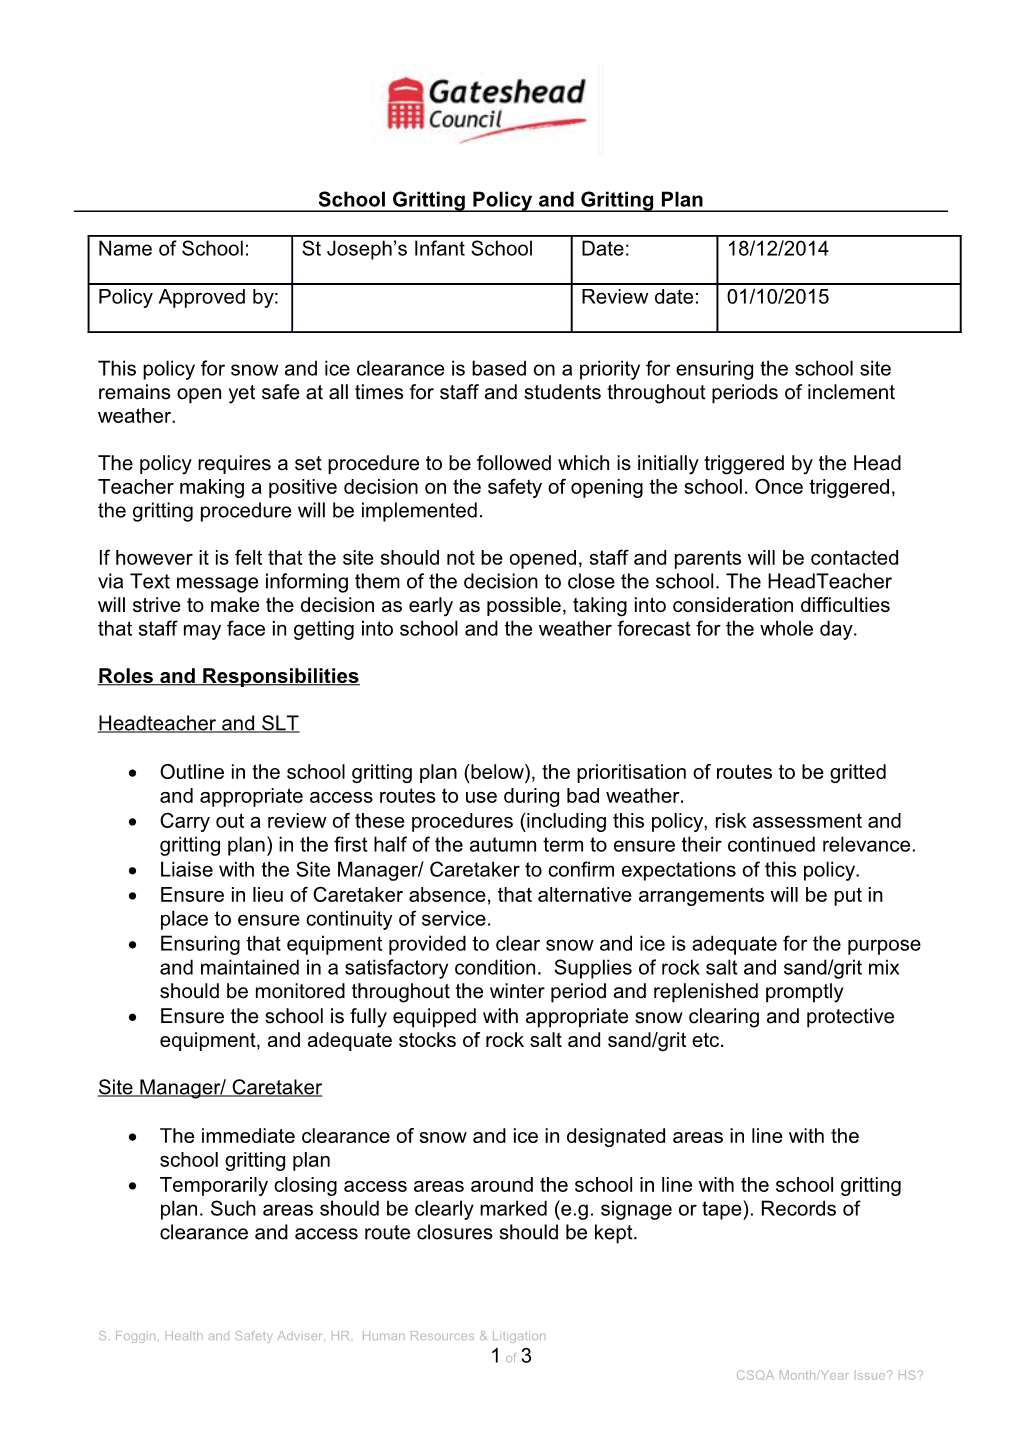 This Policy for Snow and Ice Clearance Is Based on a Priority for Ensuring the School Site